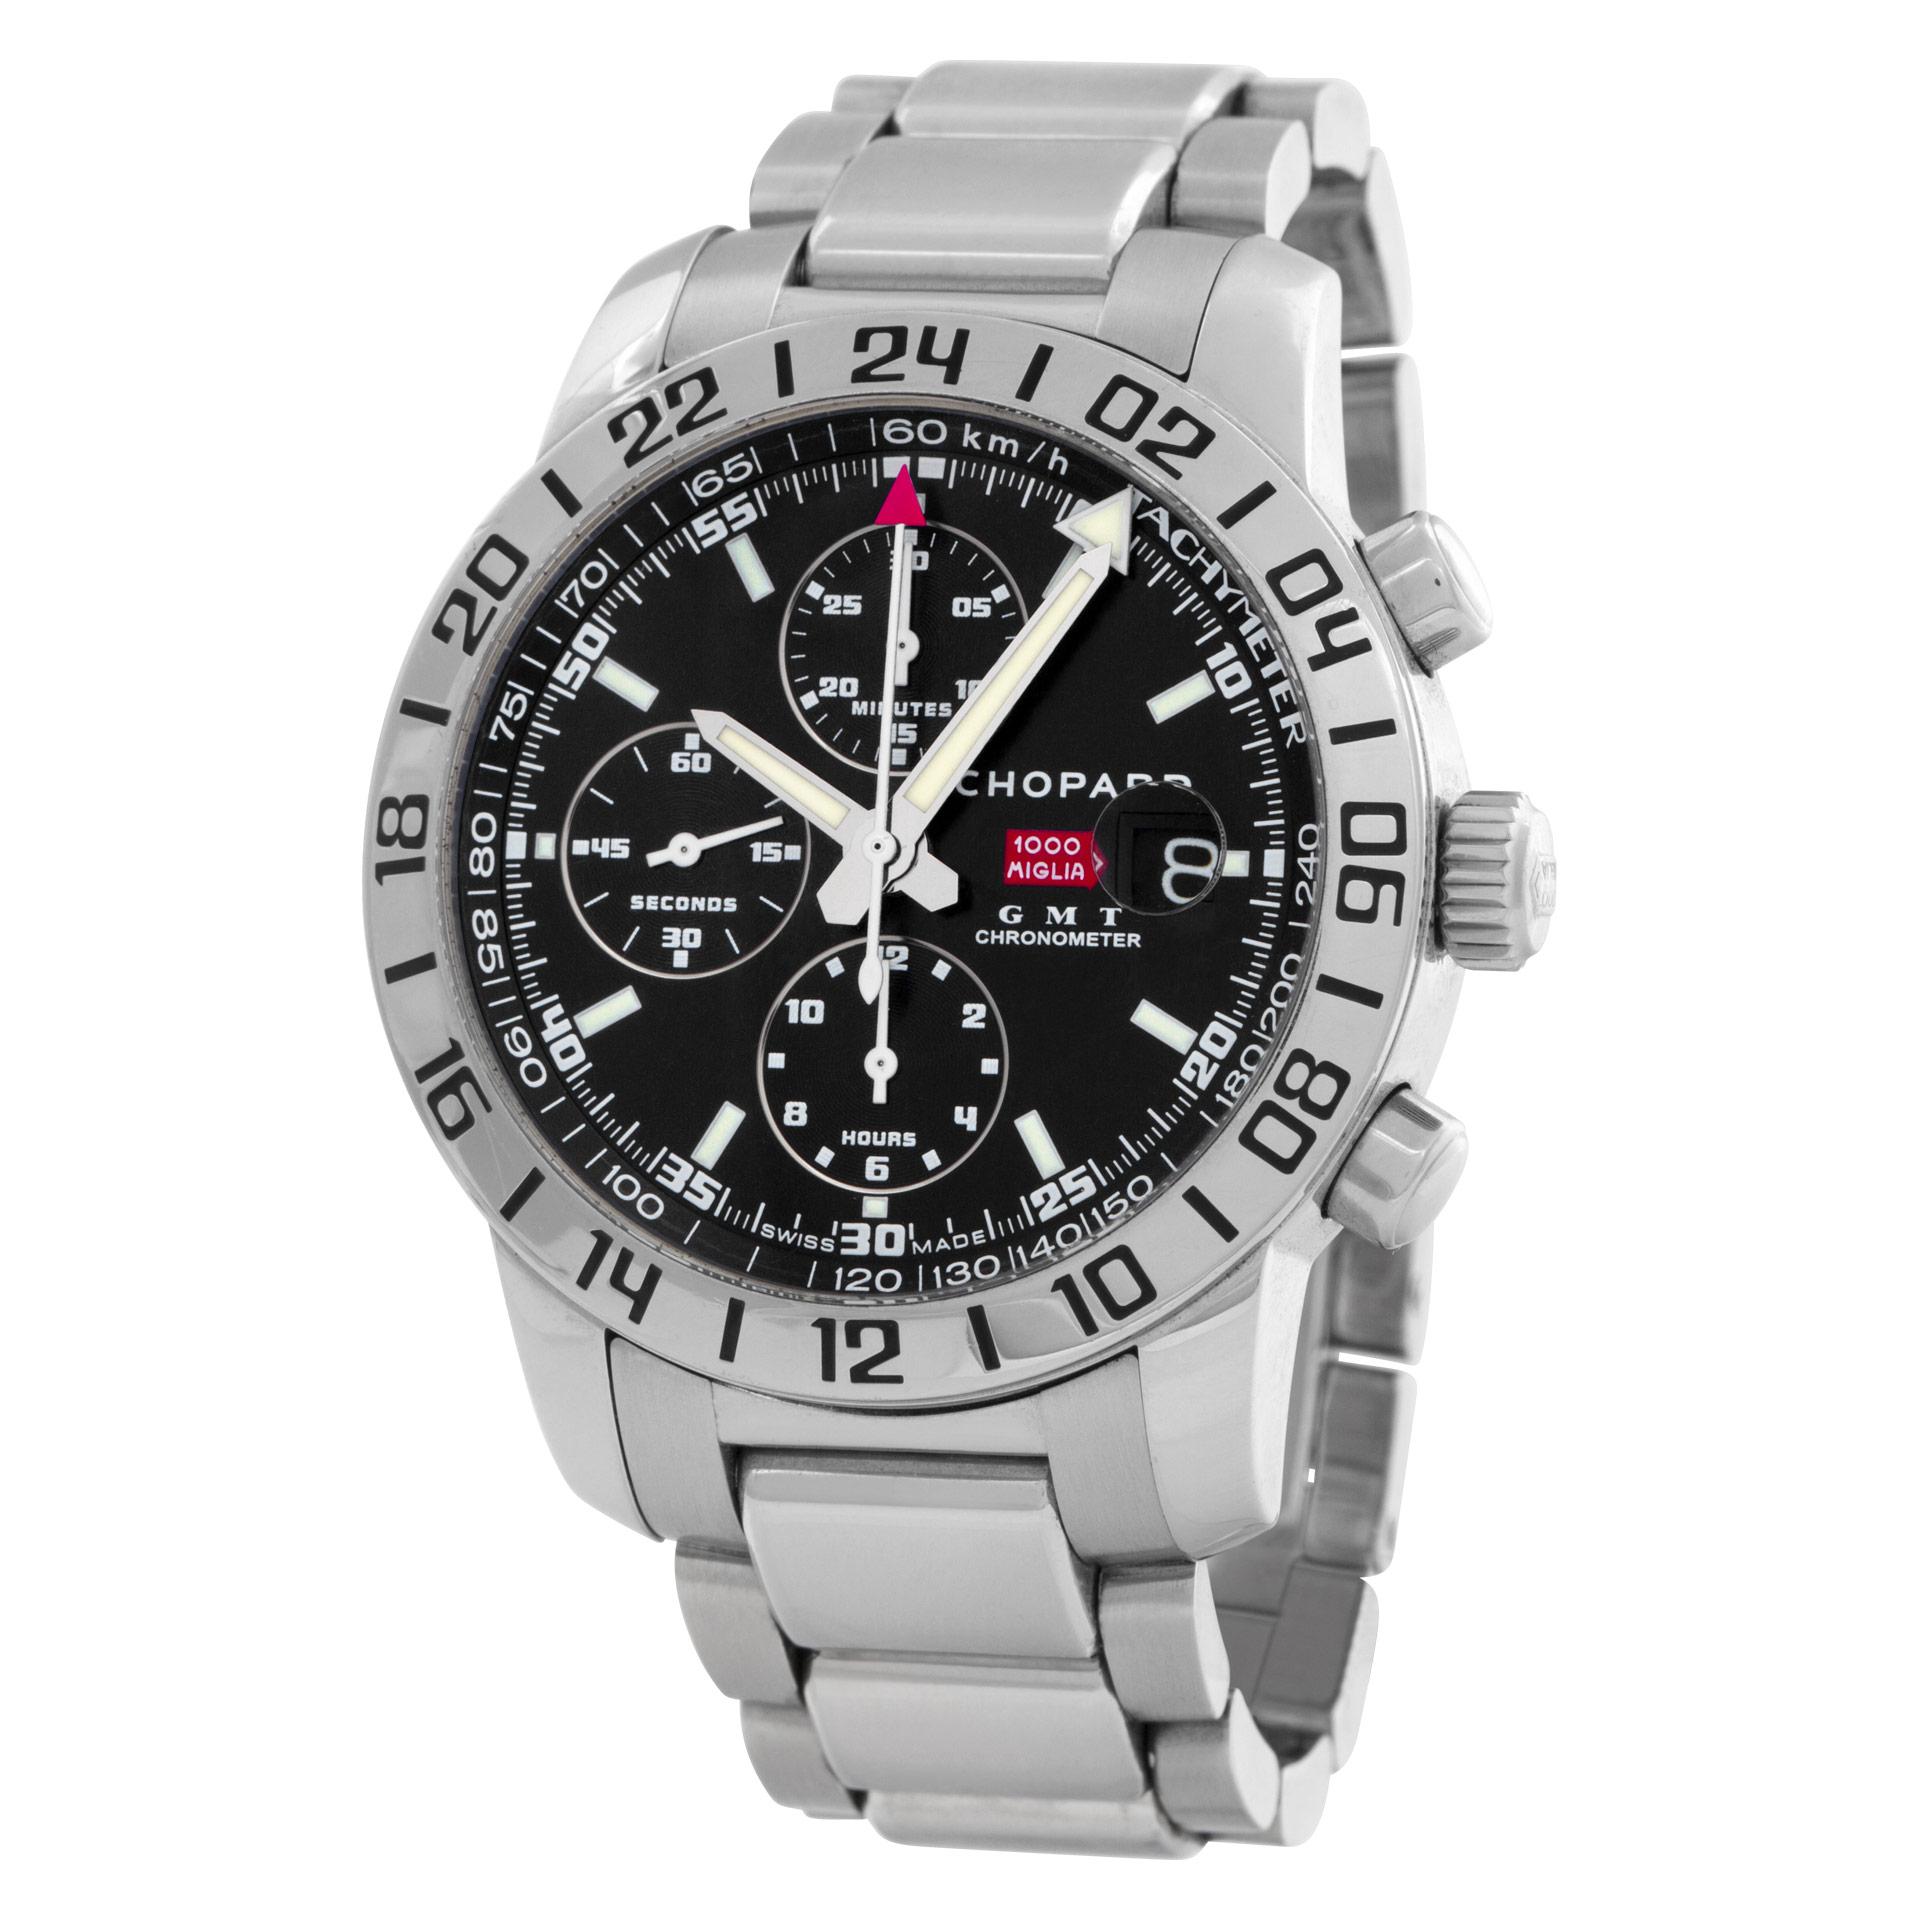 Chopard Mille Miglia GMT Chronograph in stainless steel. Auto w/ subseconds, date, chronograph and dual time. 42 mm case size. Ref 158992-3001. Circa 2010's. Fine Pre-owned Chopard Watch.   Certified preowned Sport Chopard Mille Miglia 158992-3001